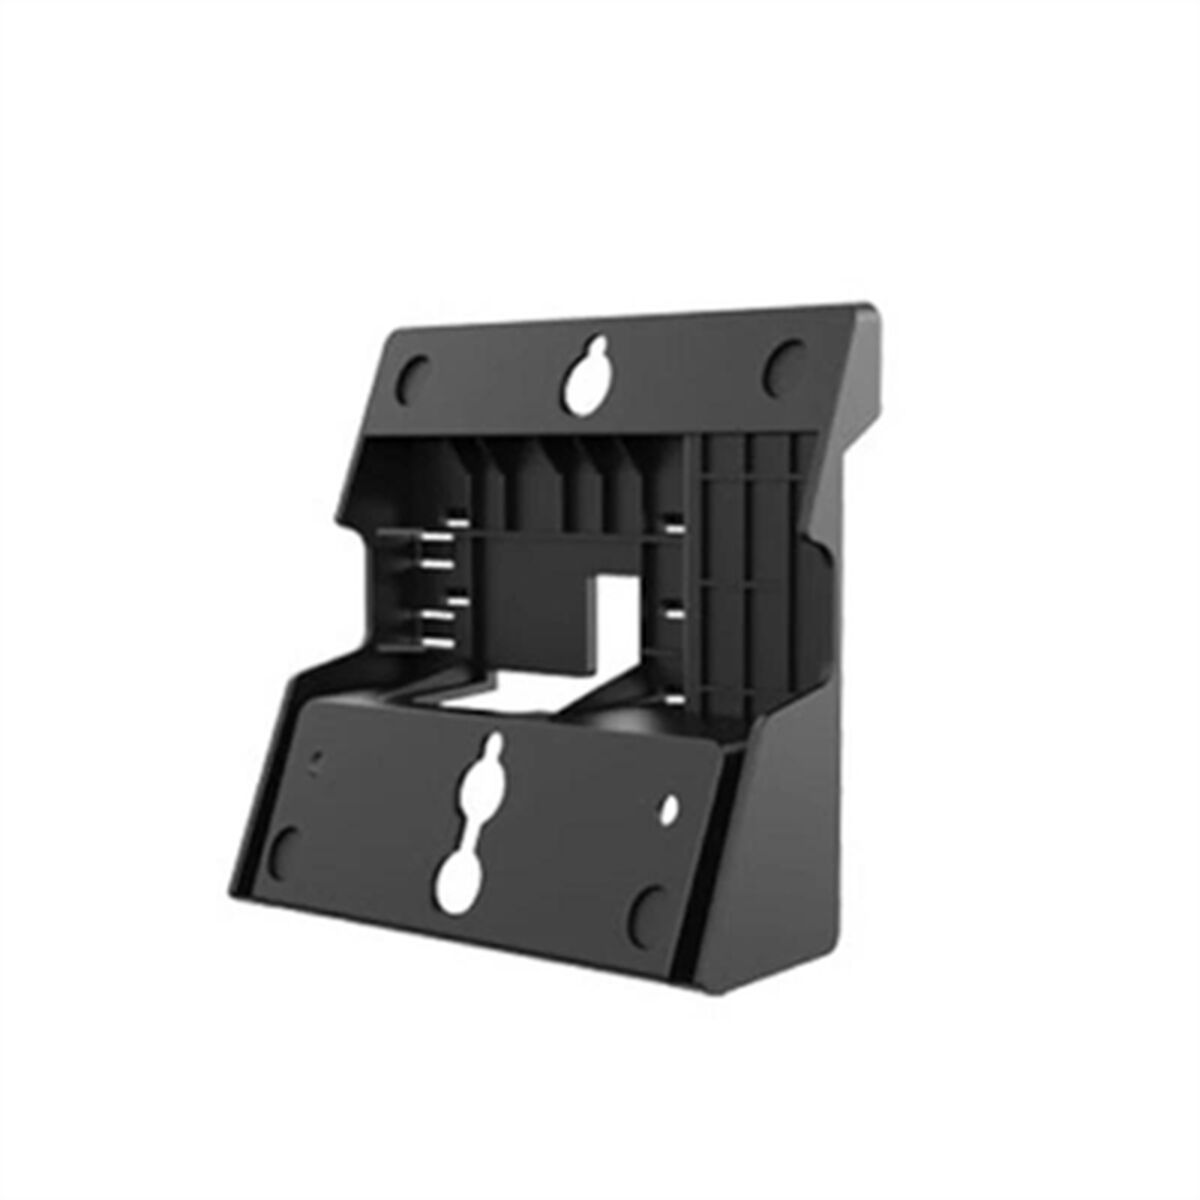 Wall Bracket Fanvil WB101, Fanvil, DIY and tools, Prevention and safety, wall-bracket-fanvil-wb101, Brand_Fanvil, category-reference-2399, category-reference-2471, category-reference-3209, category-reference-t-15436, category-reference-t-15495, category-reference-t-19651, category-reference-t-21086, category-reference-t-25209, Condition_NEW, ferretería, home automation / security, Price_20 - 50, RiotNook